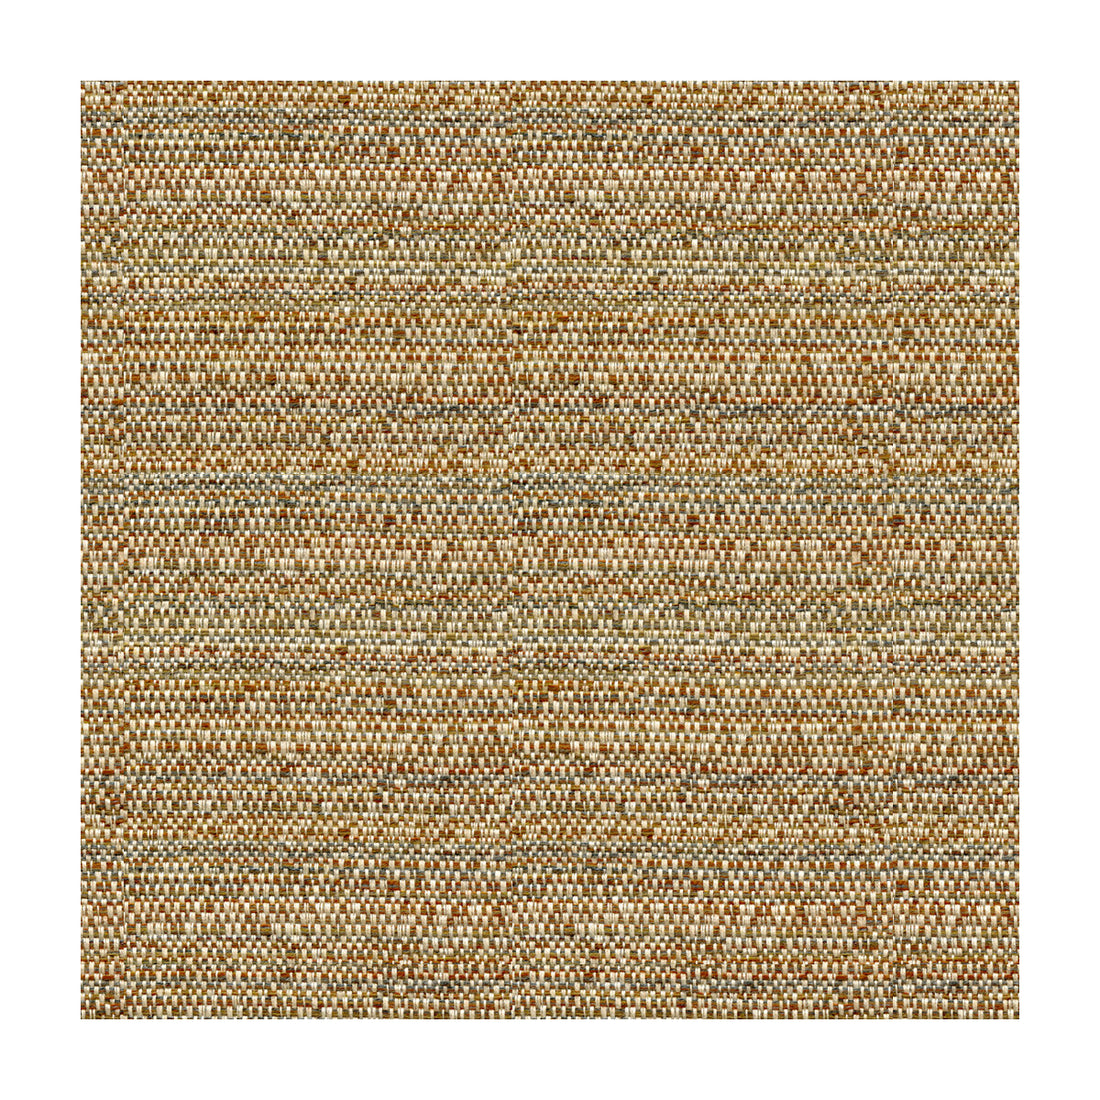 Helm fabric in earth color - pattern 34869.616.0 - by Kravet Design in the Oceania Indoor Outdoor collection